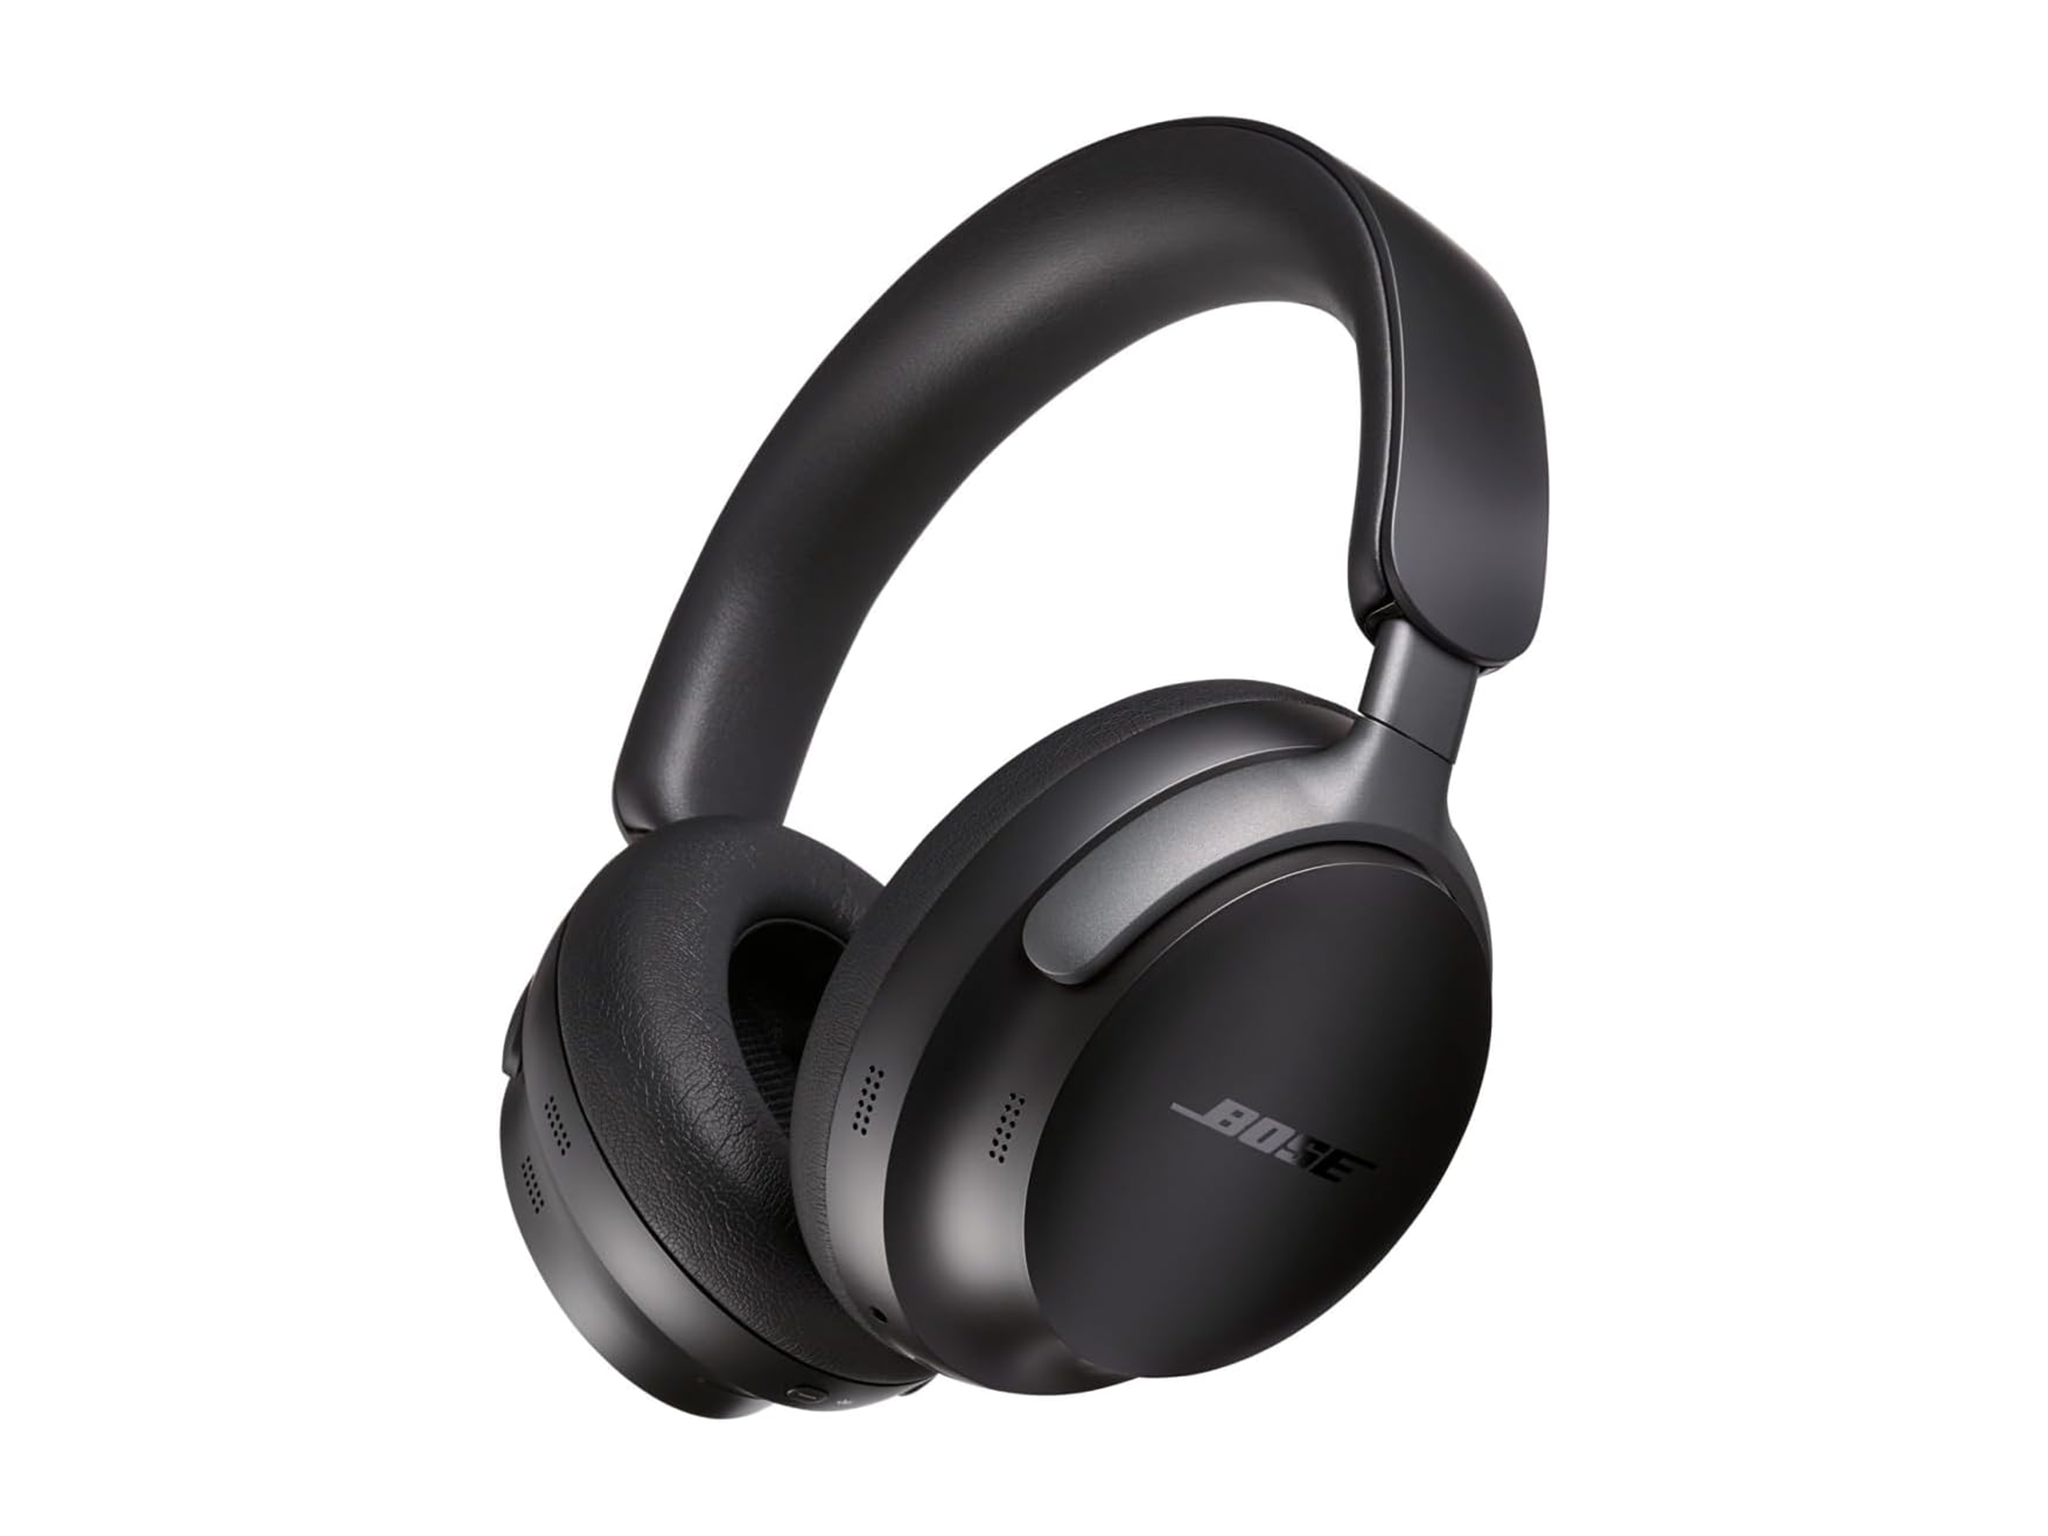 Bose QuietComfort ultra wireless noise cancelling headphones with spatial audio